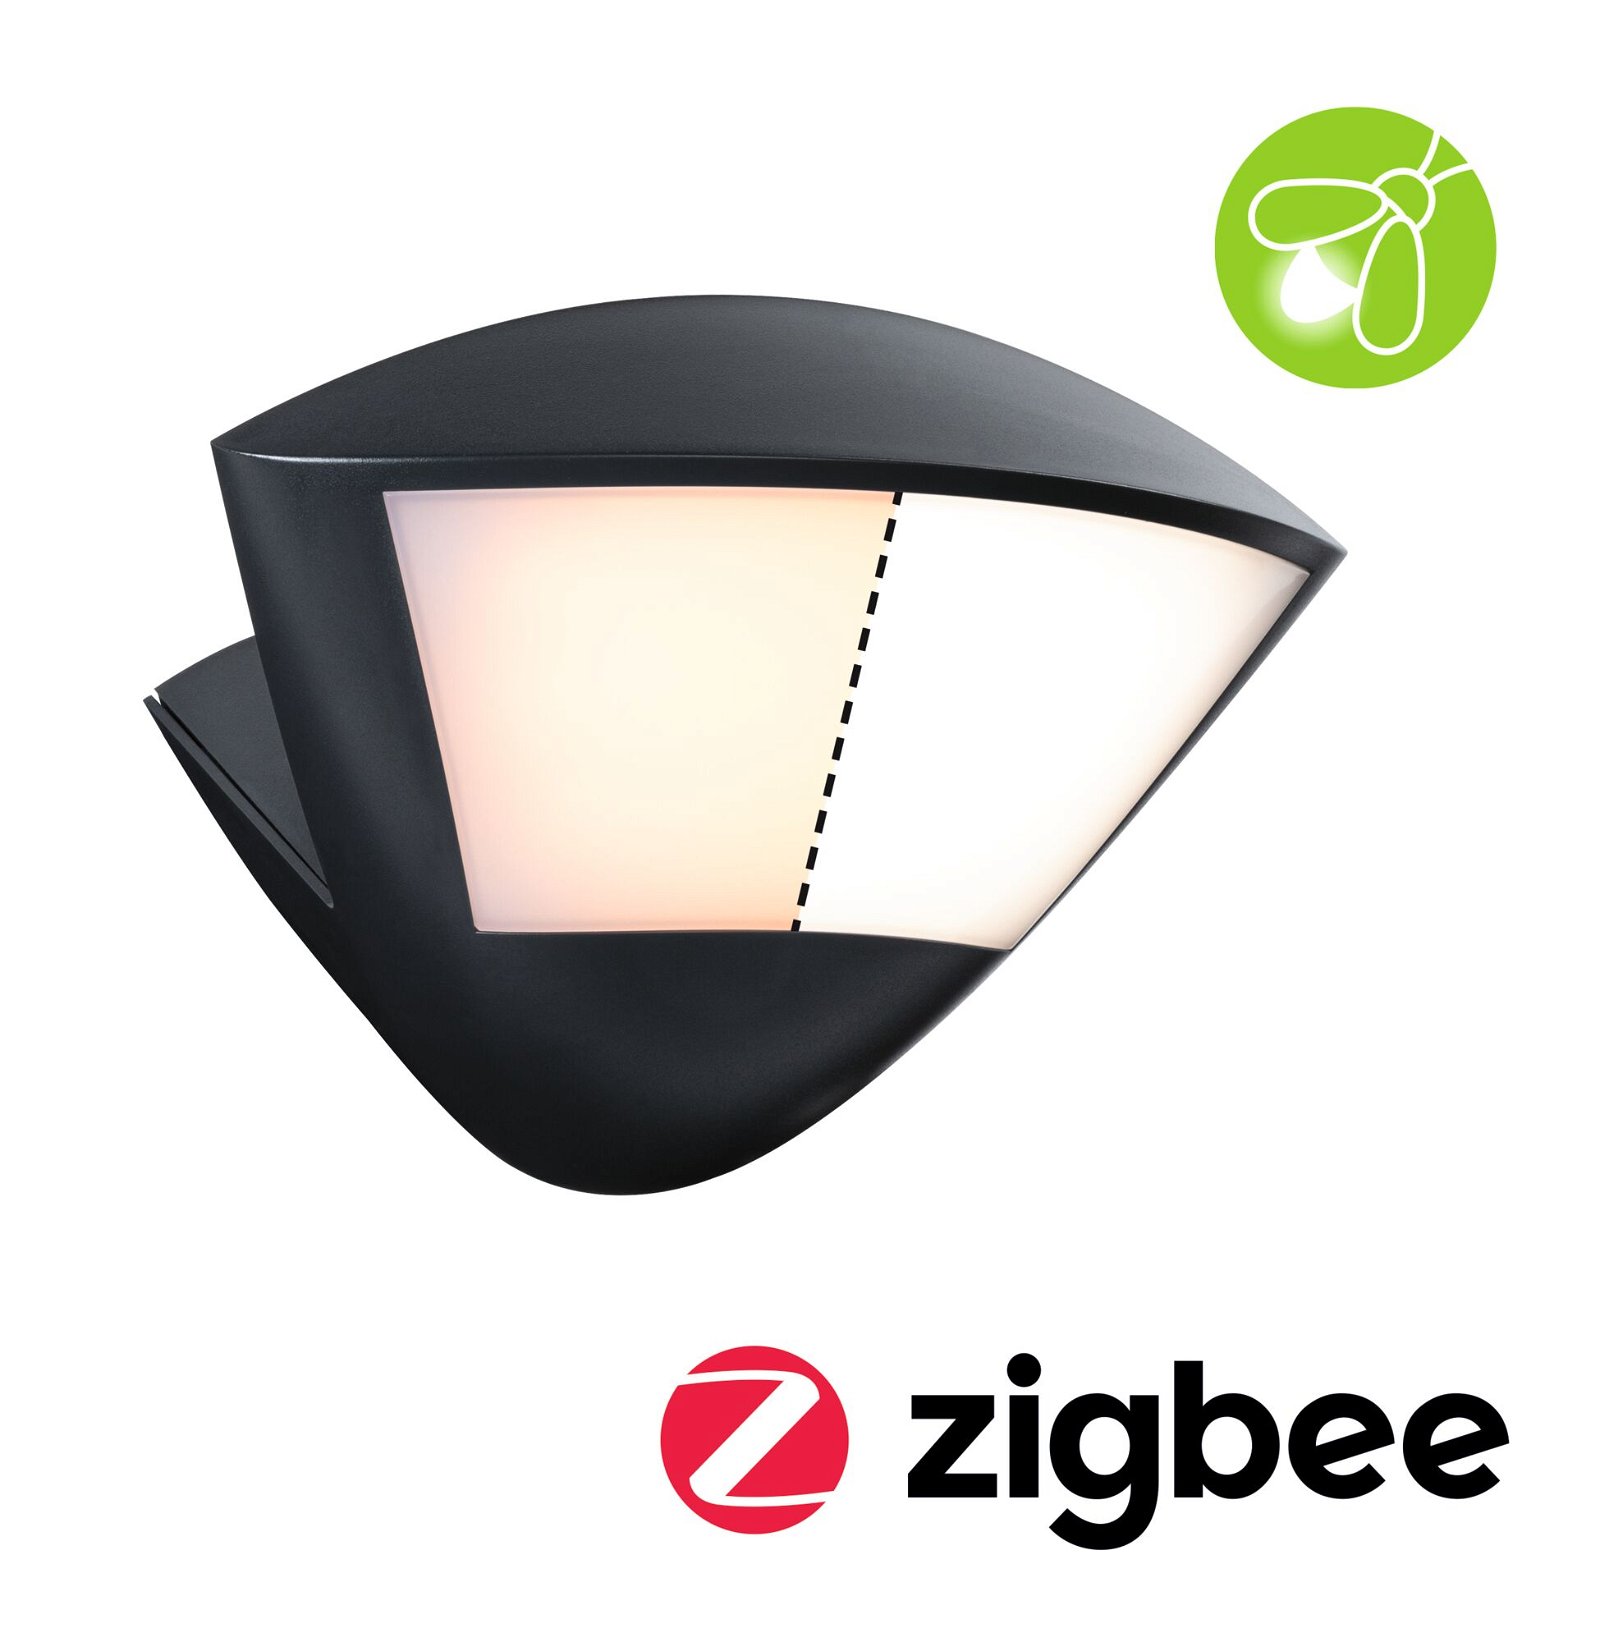 LED Exterior wall luminaire Smart Home Zigbee 3.0 Skyla Motion detector insect friendly IP44 226x164mm Tunable Warm 10W 840lm 230V Anthracite Aluminium